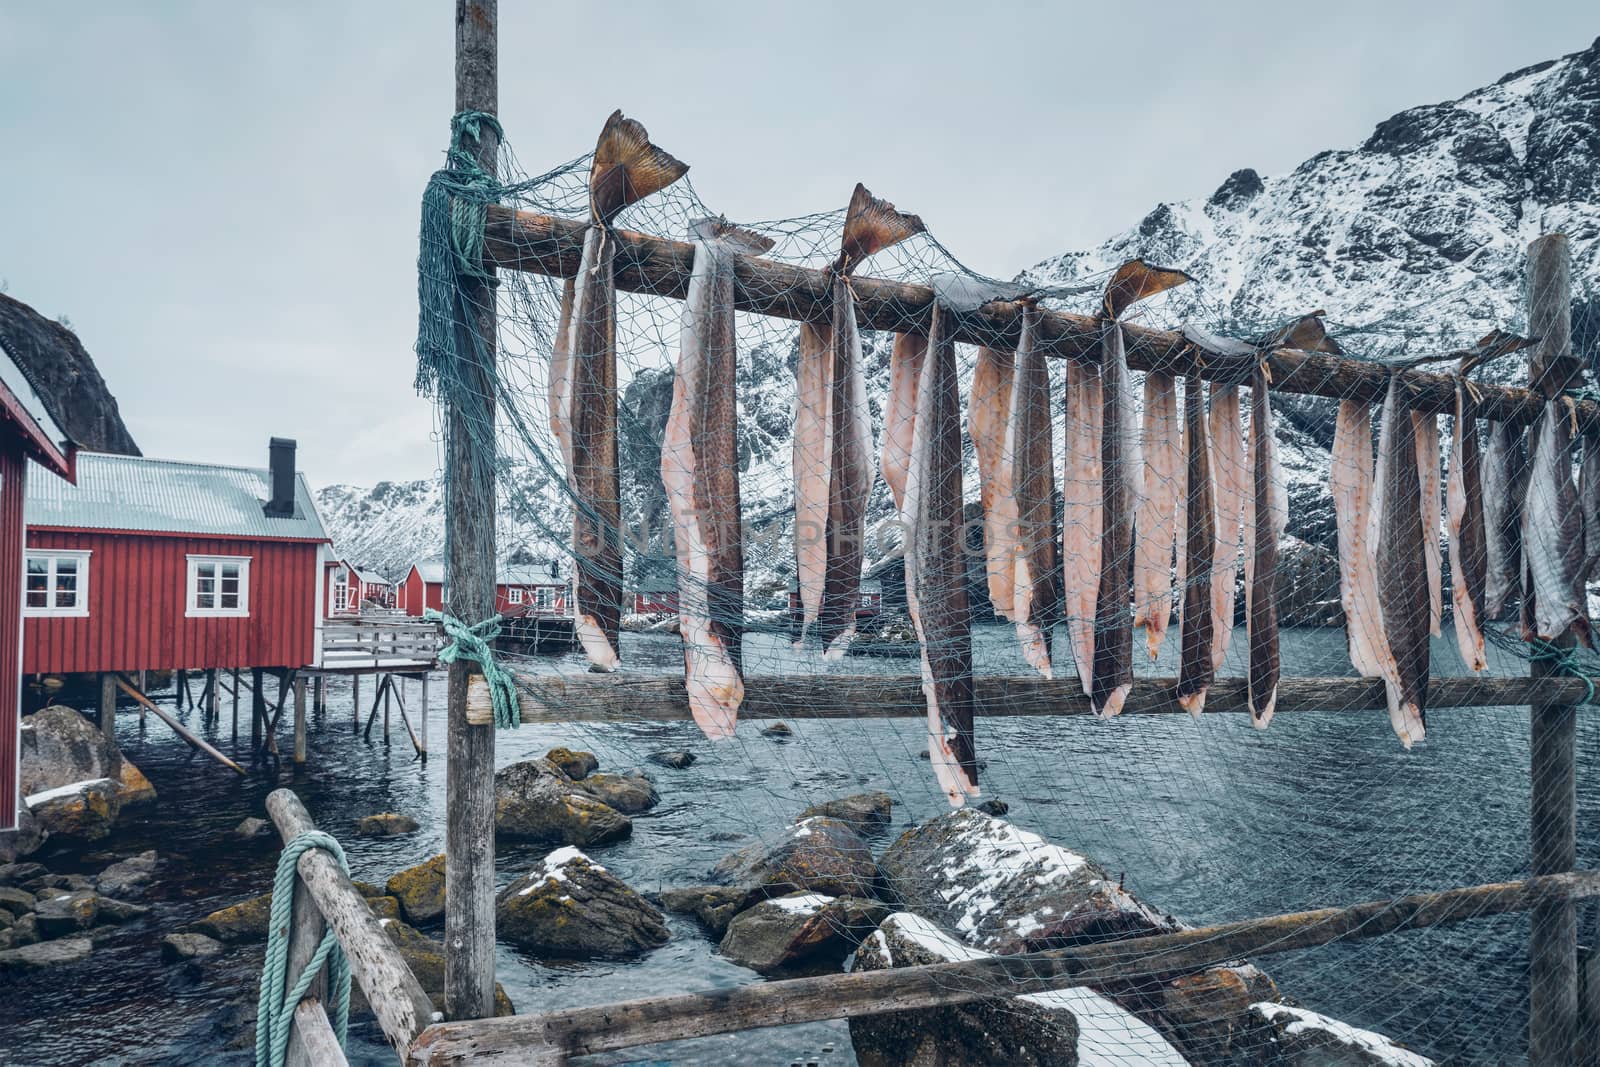 Drying stockfish cod in Nusfjord fishing village in Norway by dimol